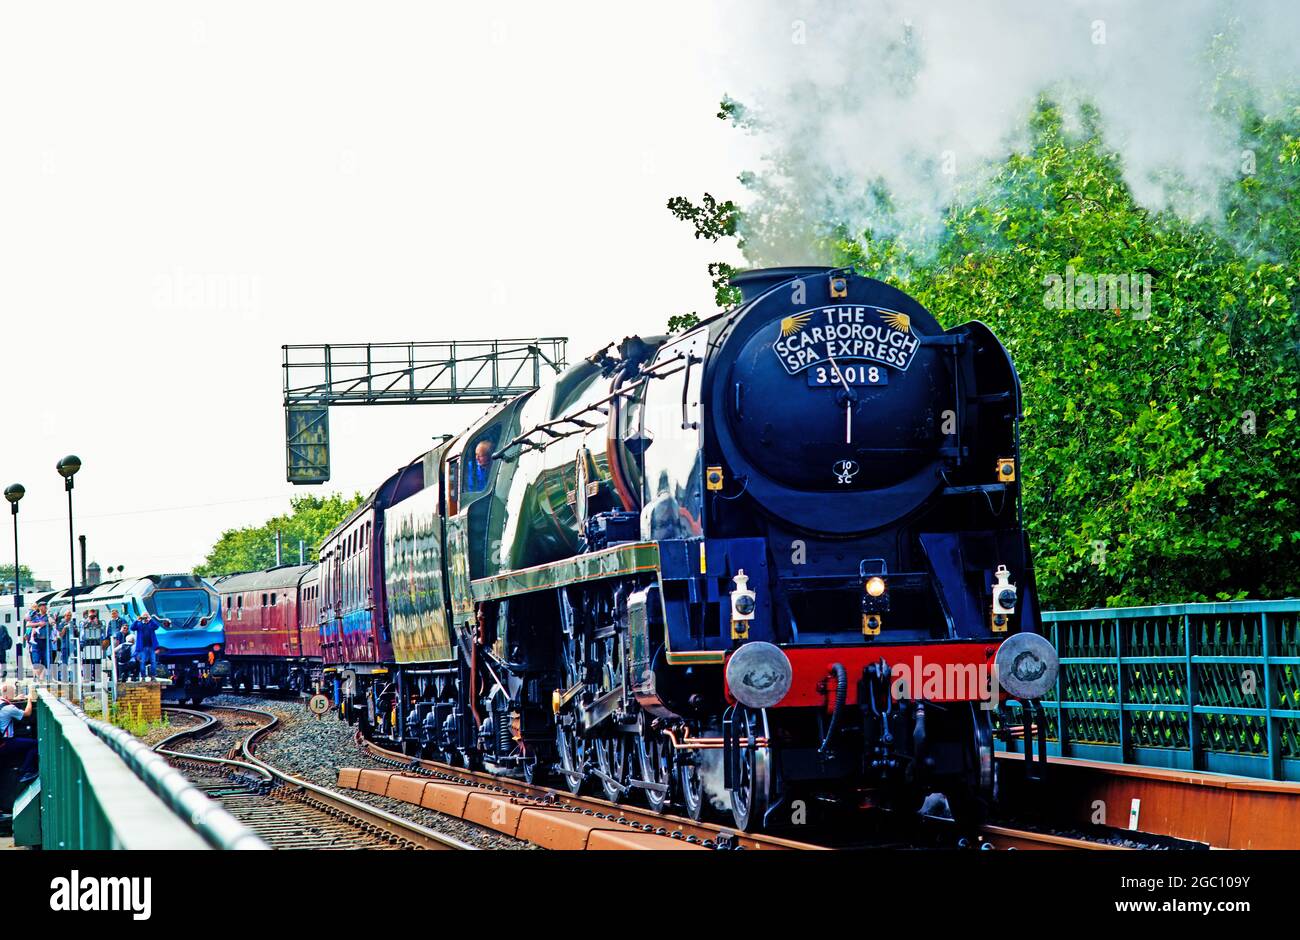 Merchant Navy Class No 35018 British India Line leaving York, Scarborough Spa Express, England, 5th August 2021 Stock Photo